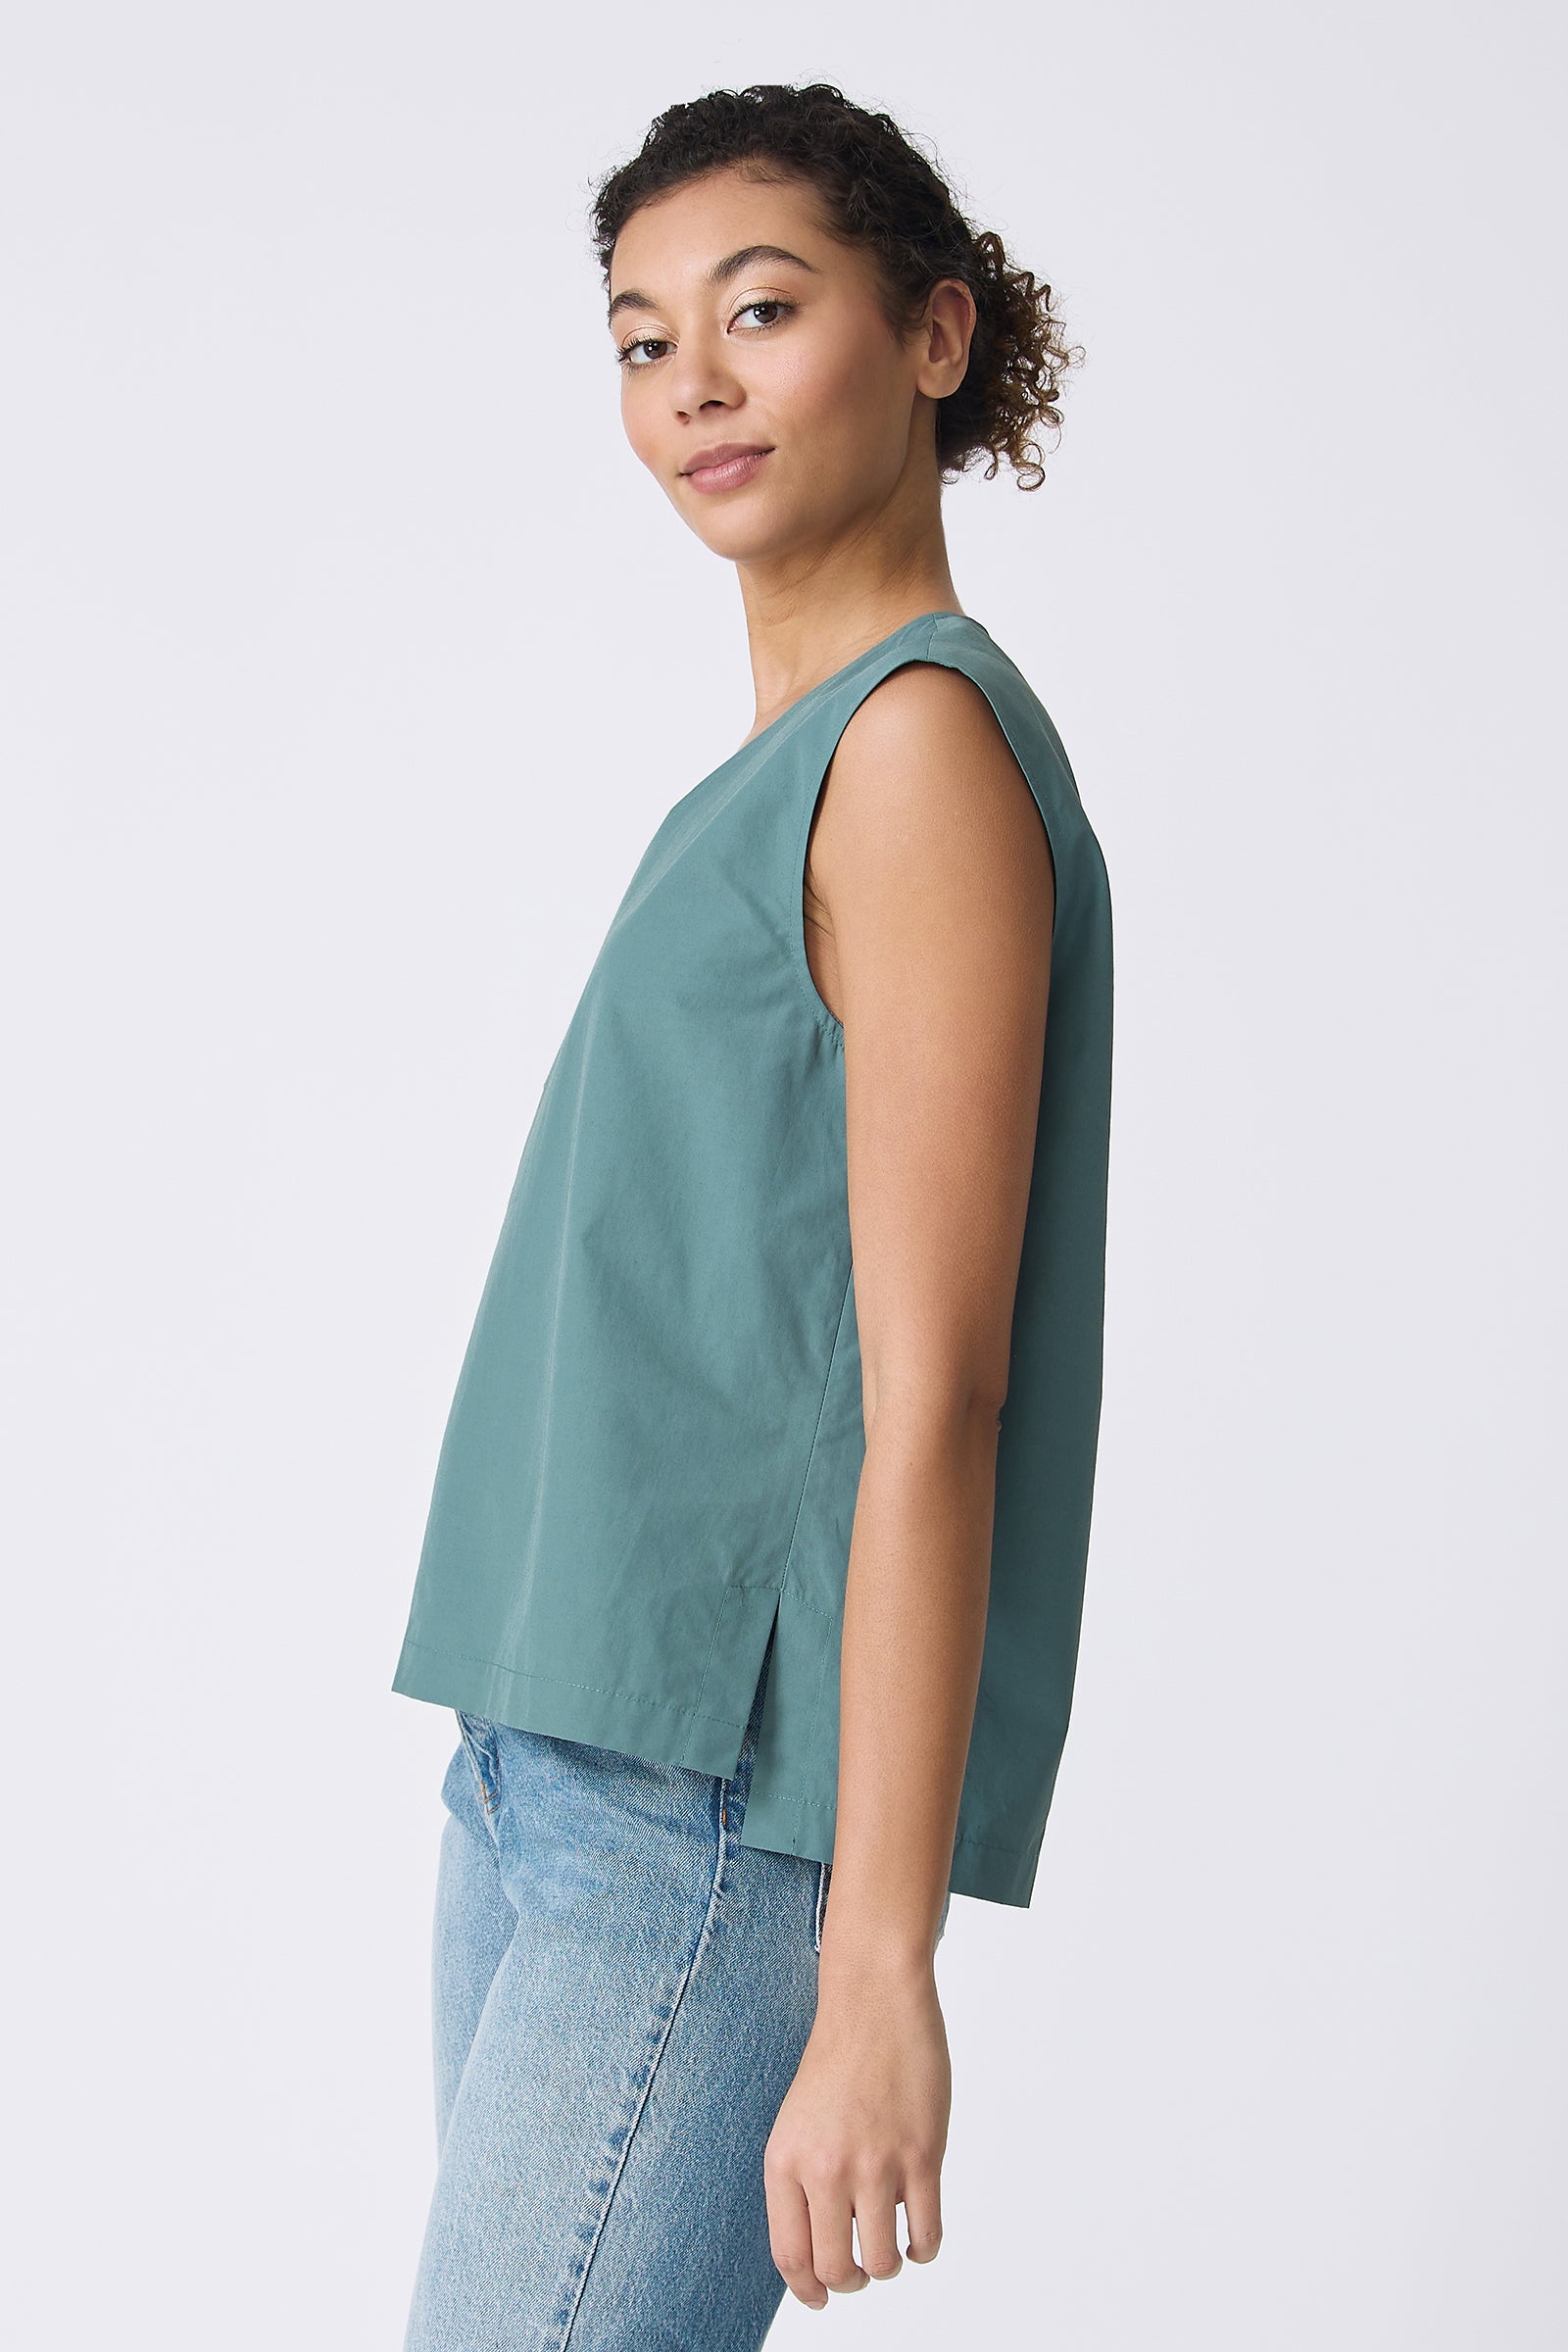 Ava V-Neck Shell Top in Sage on model looking at camera side view